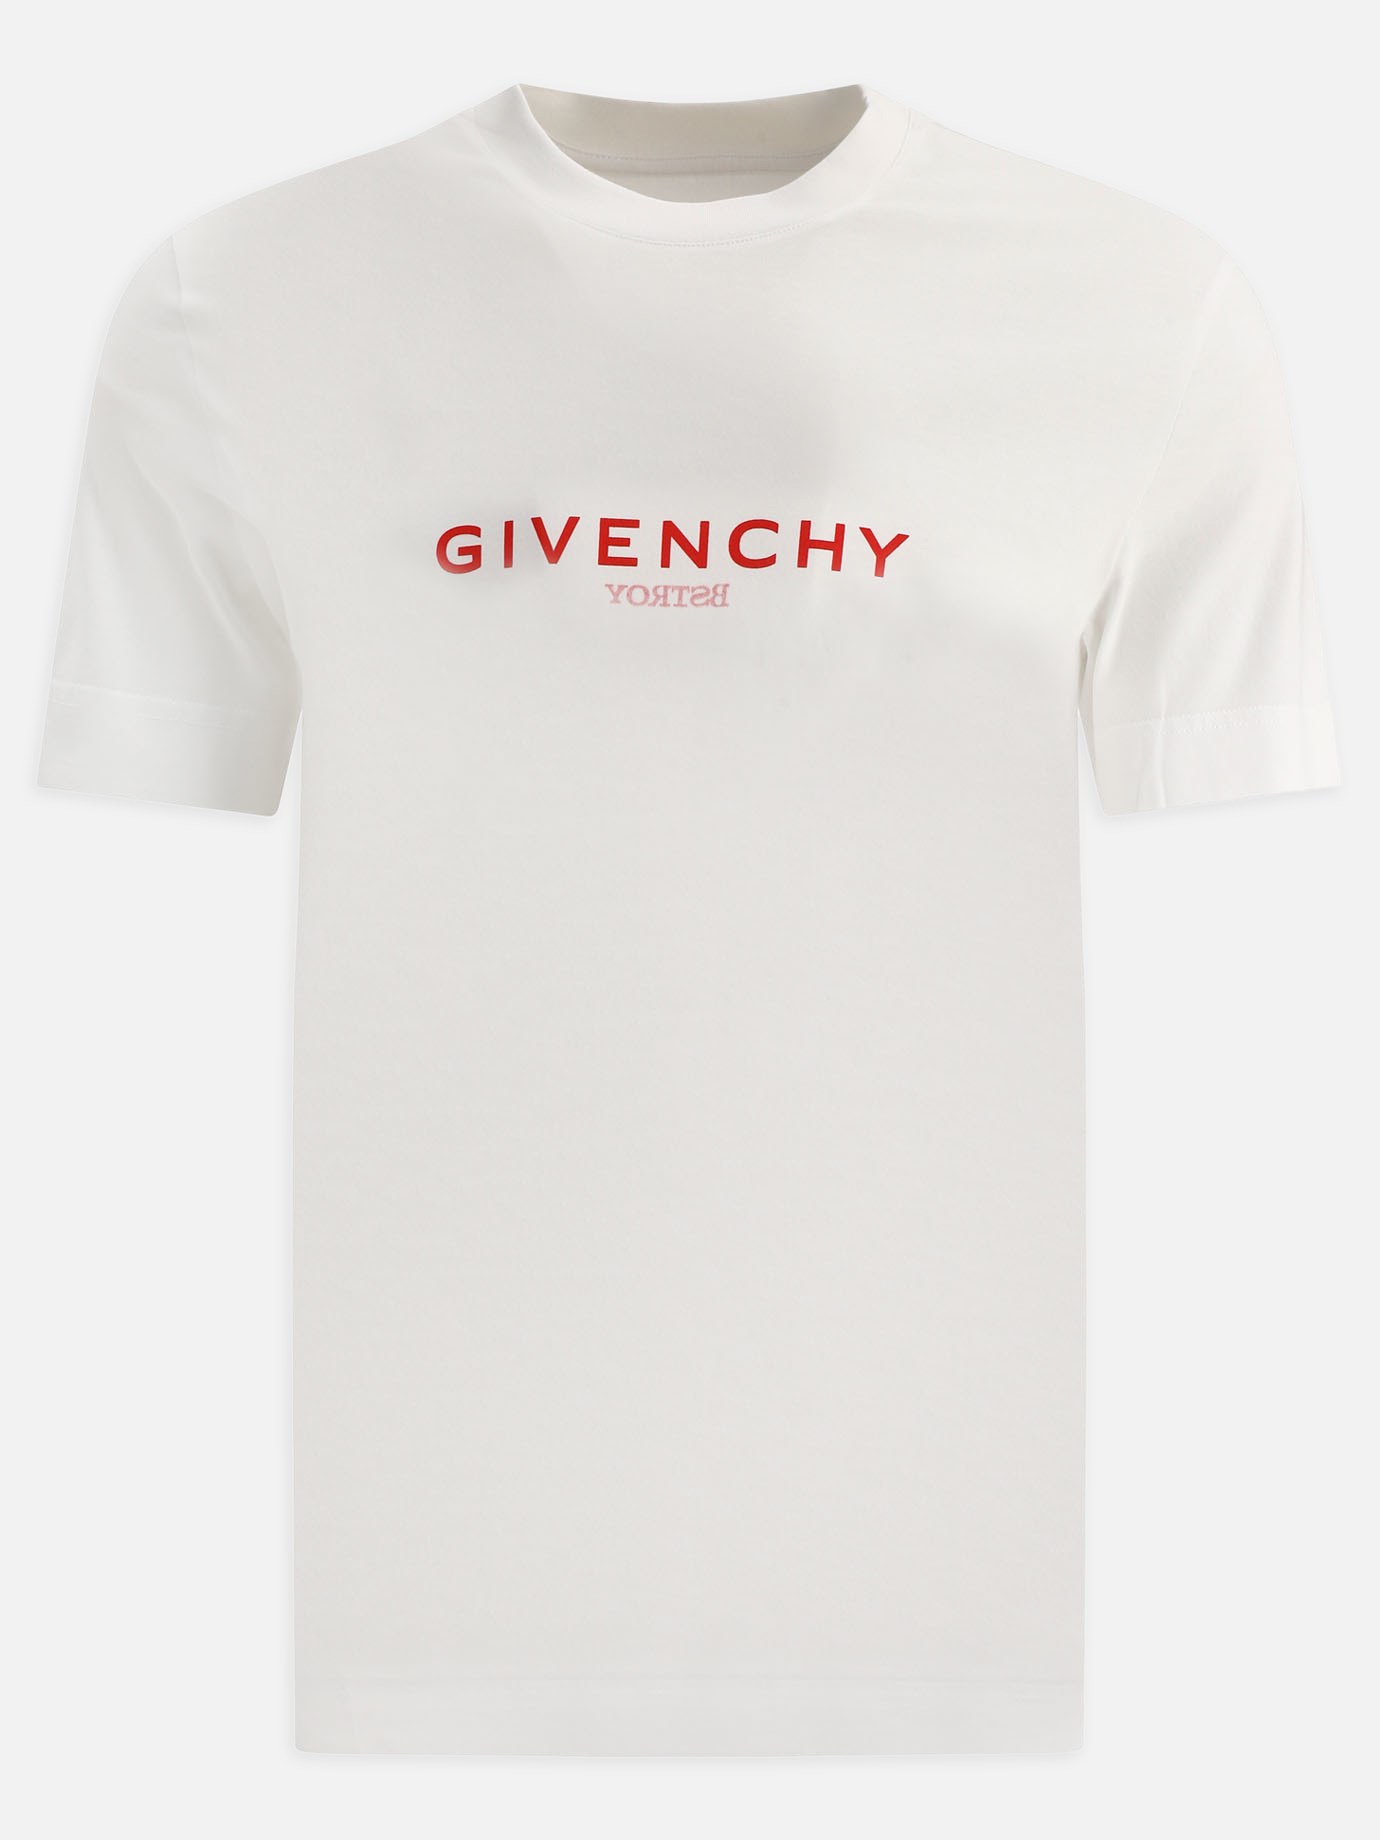 T-shirt reverse  BSTROY x Givenchy by Givenchy - 5